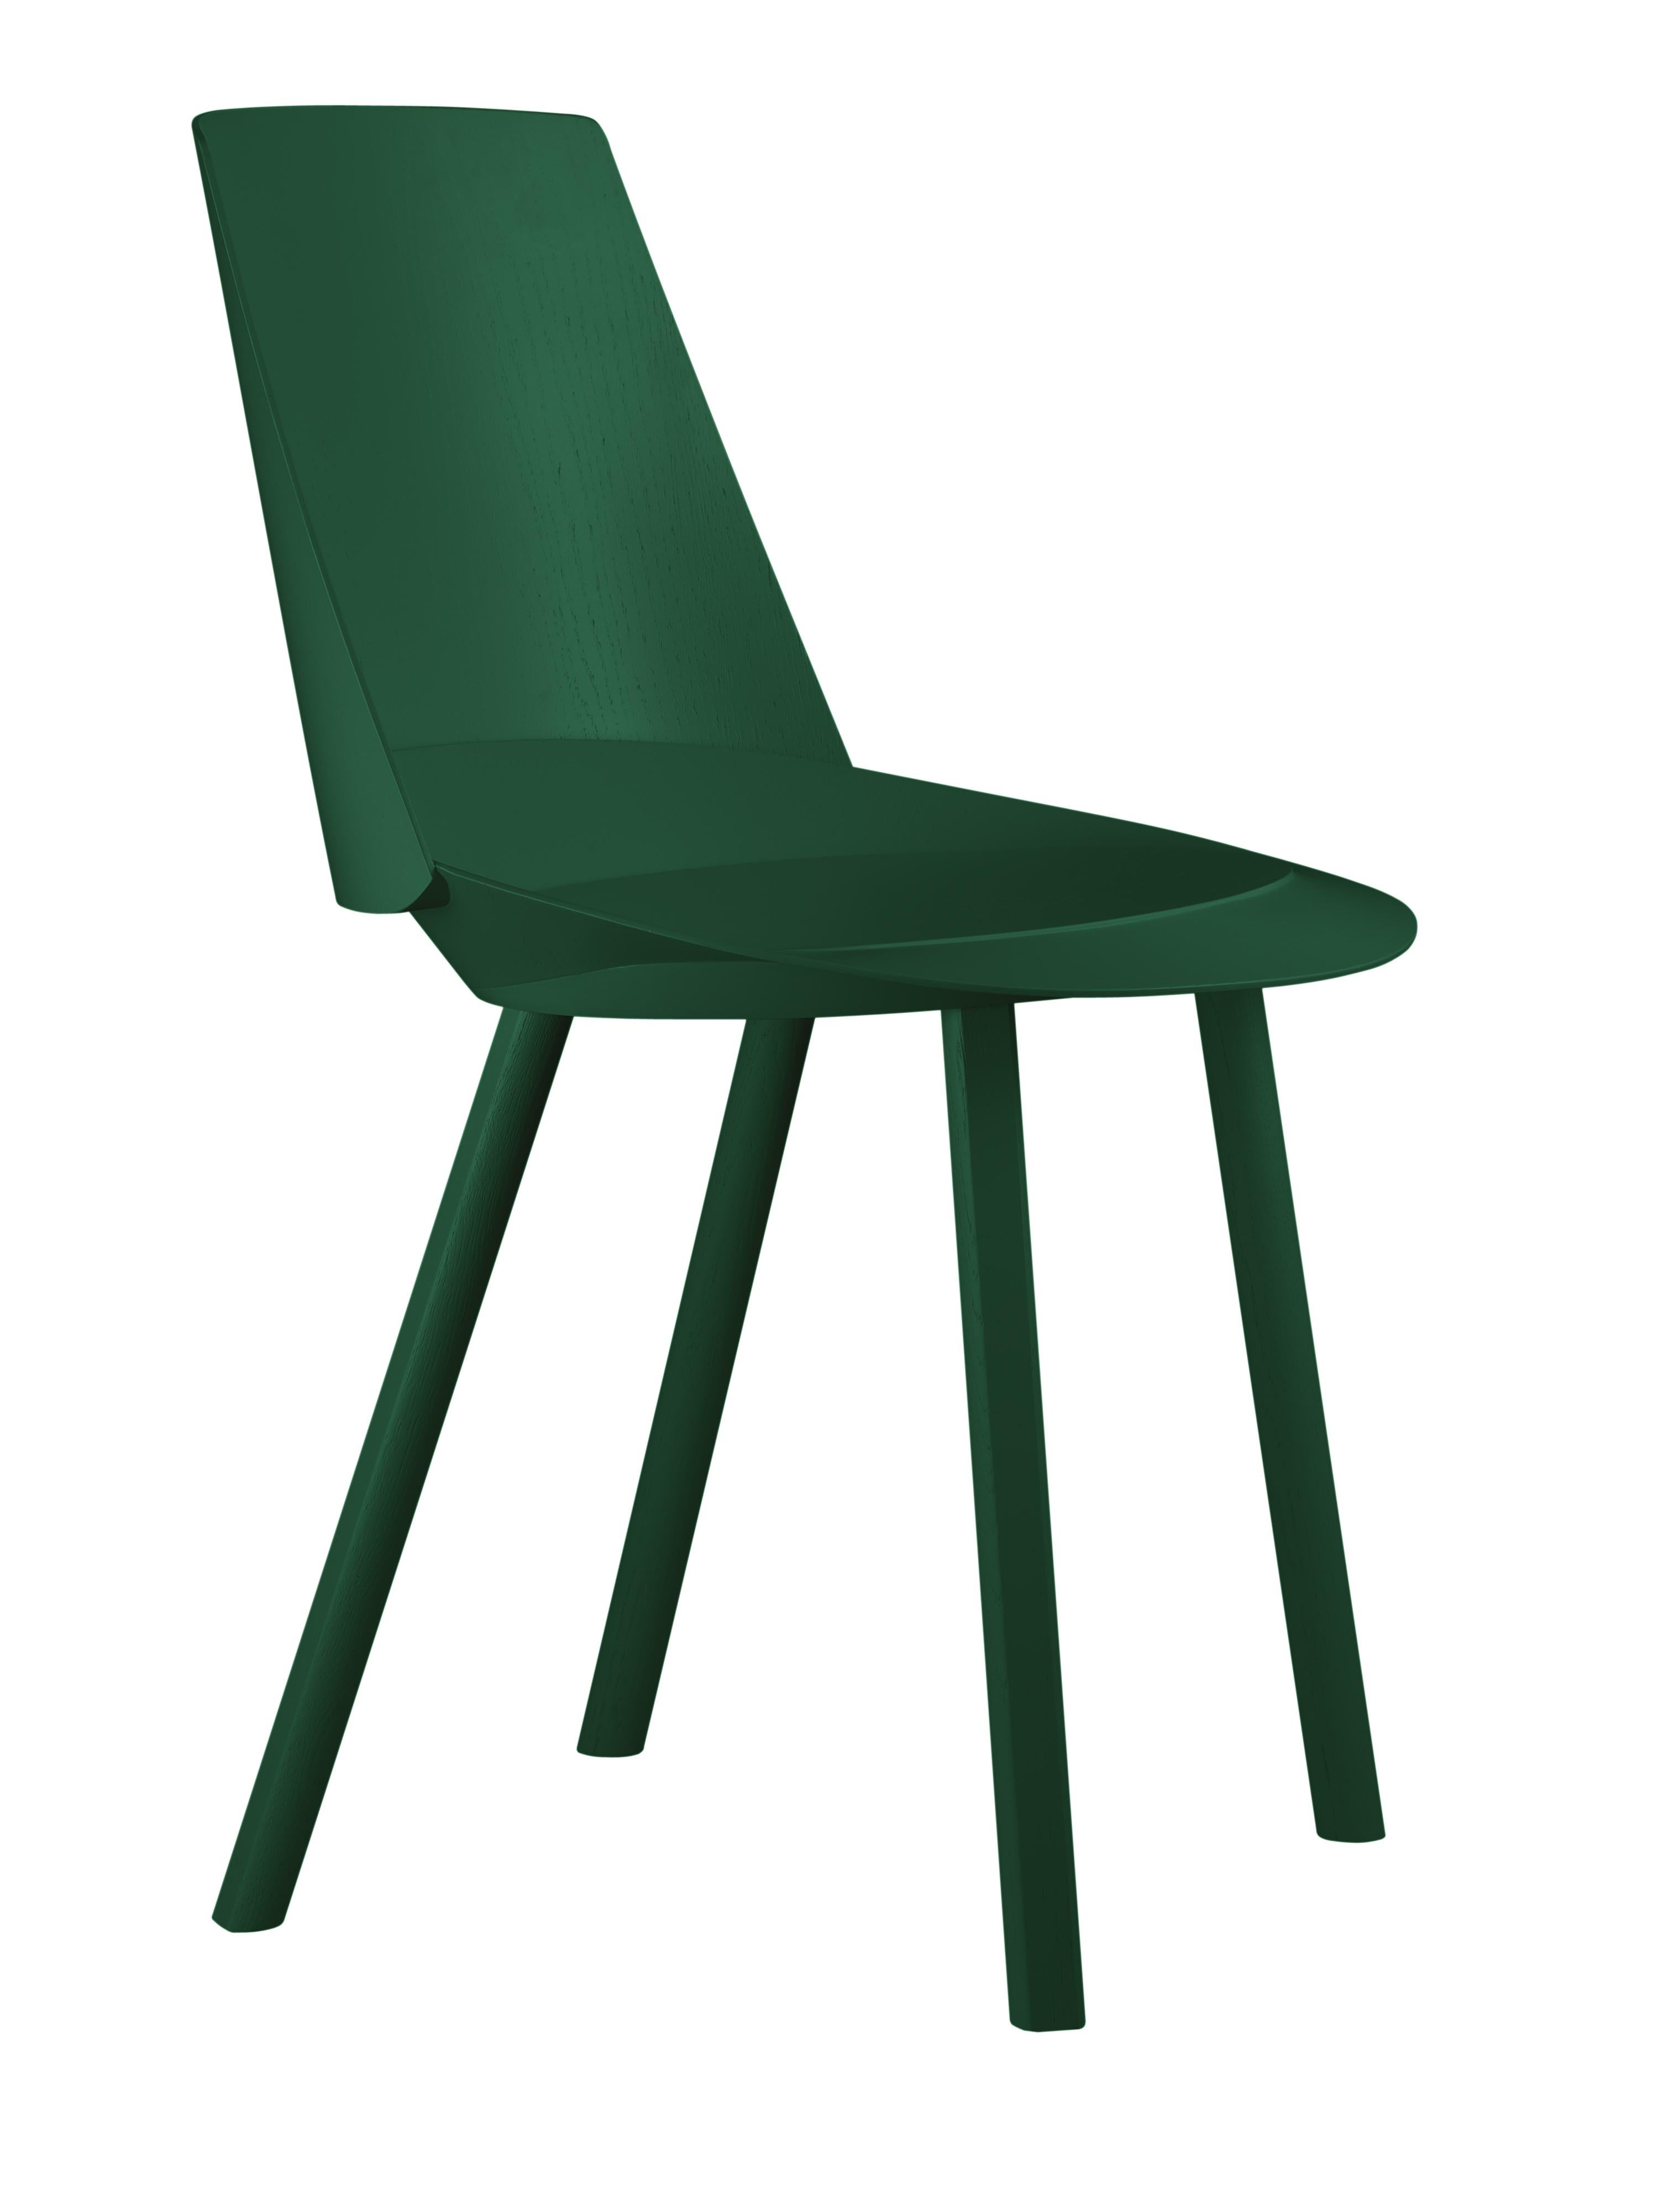 For Sale: Green (Ivy Green Lacquer) e15 Customizable Houdini Side Chair by Stefan Diez